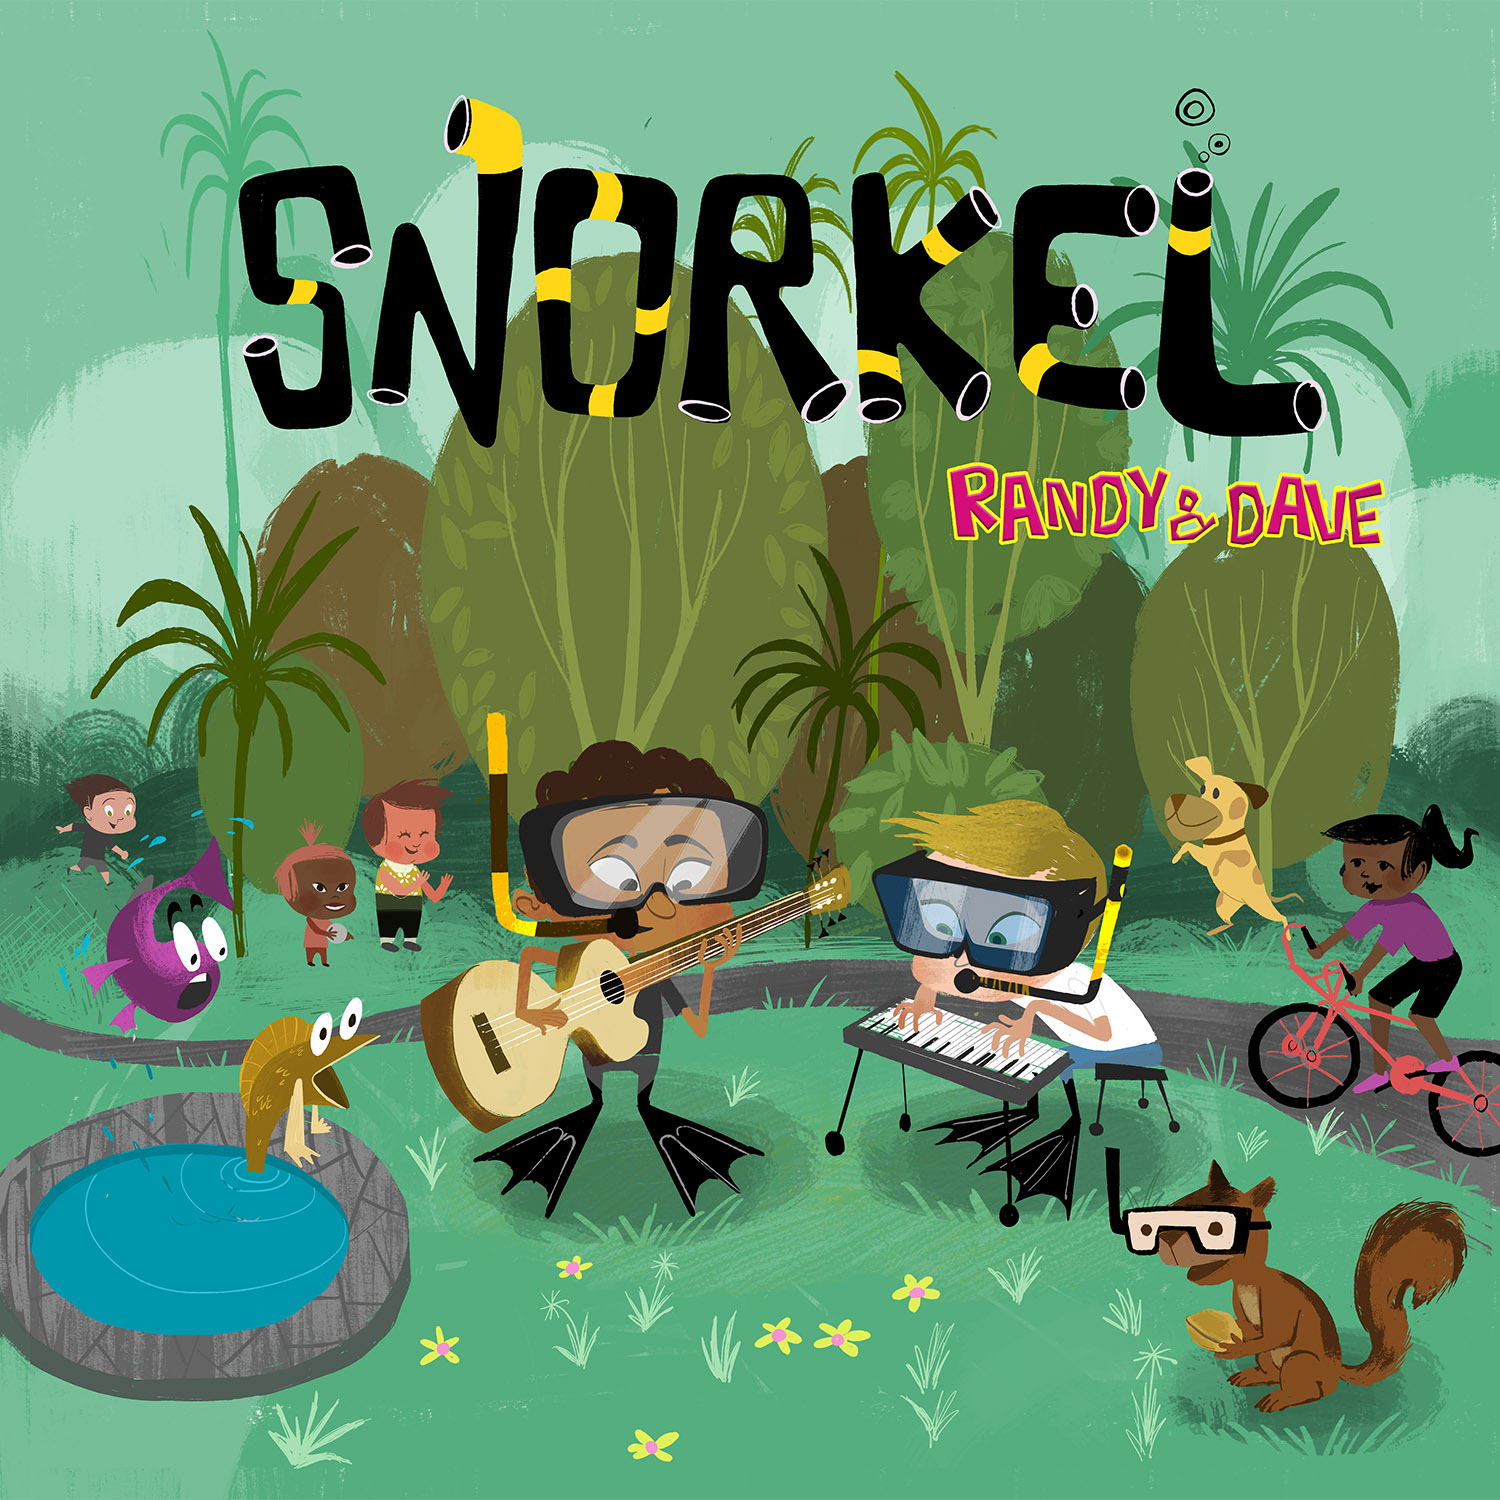 Snorkel by Randy & Dave